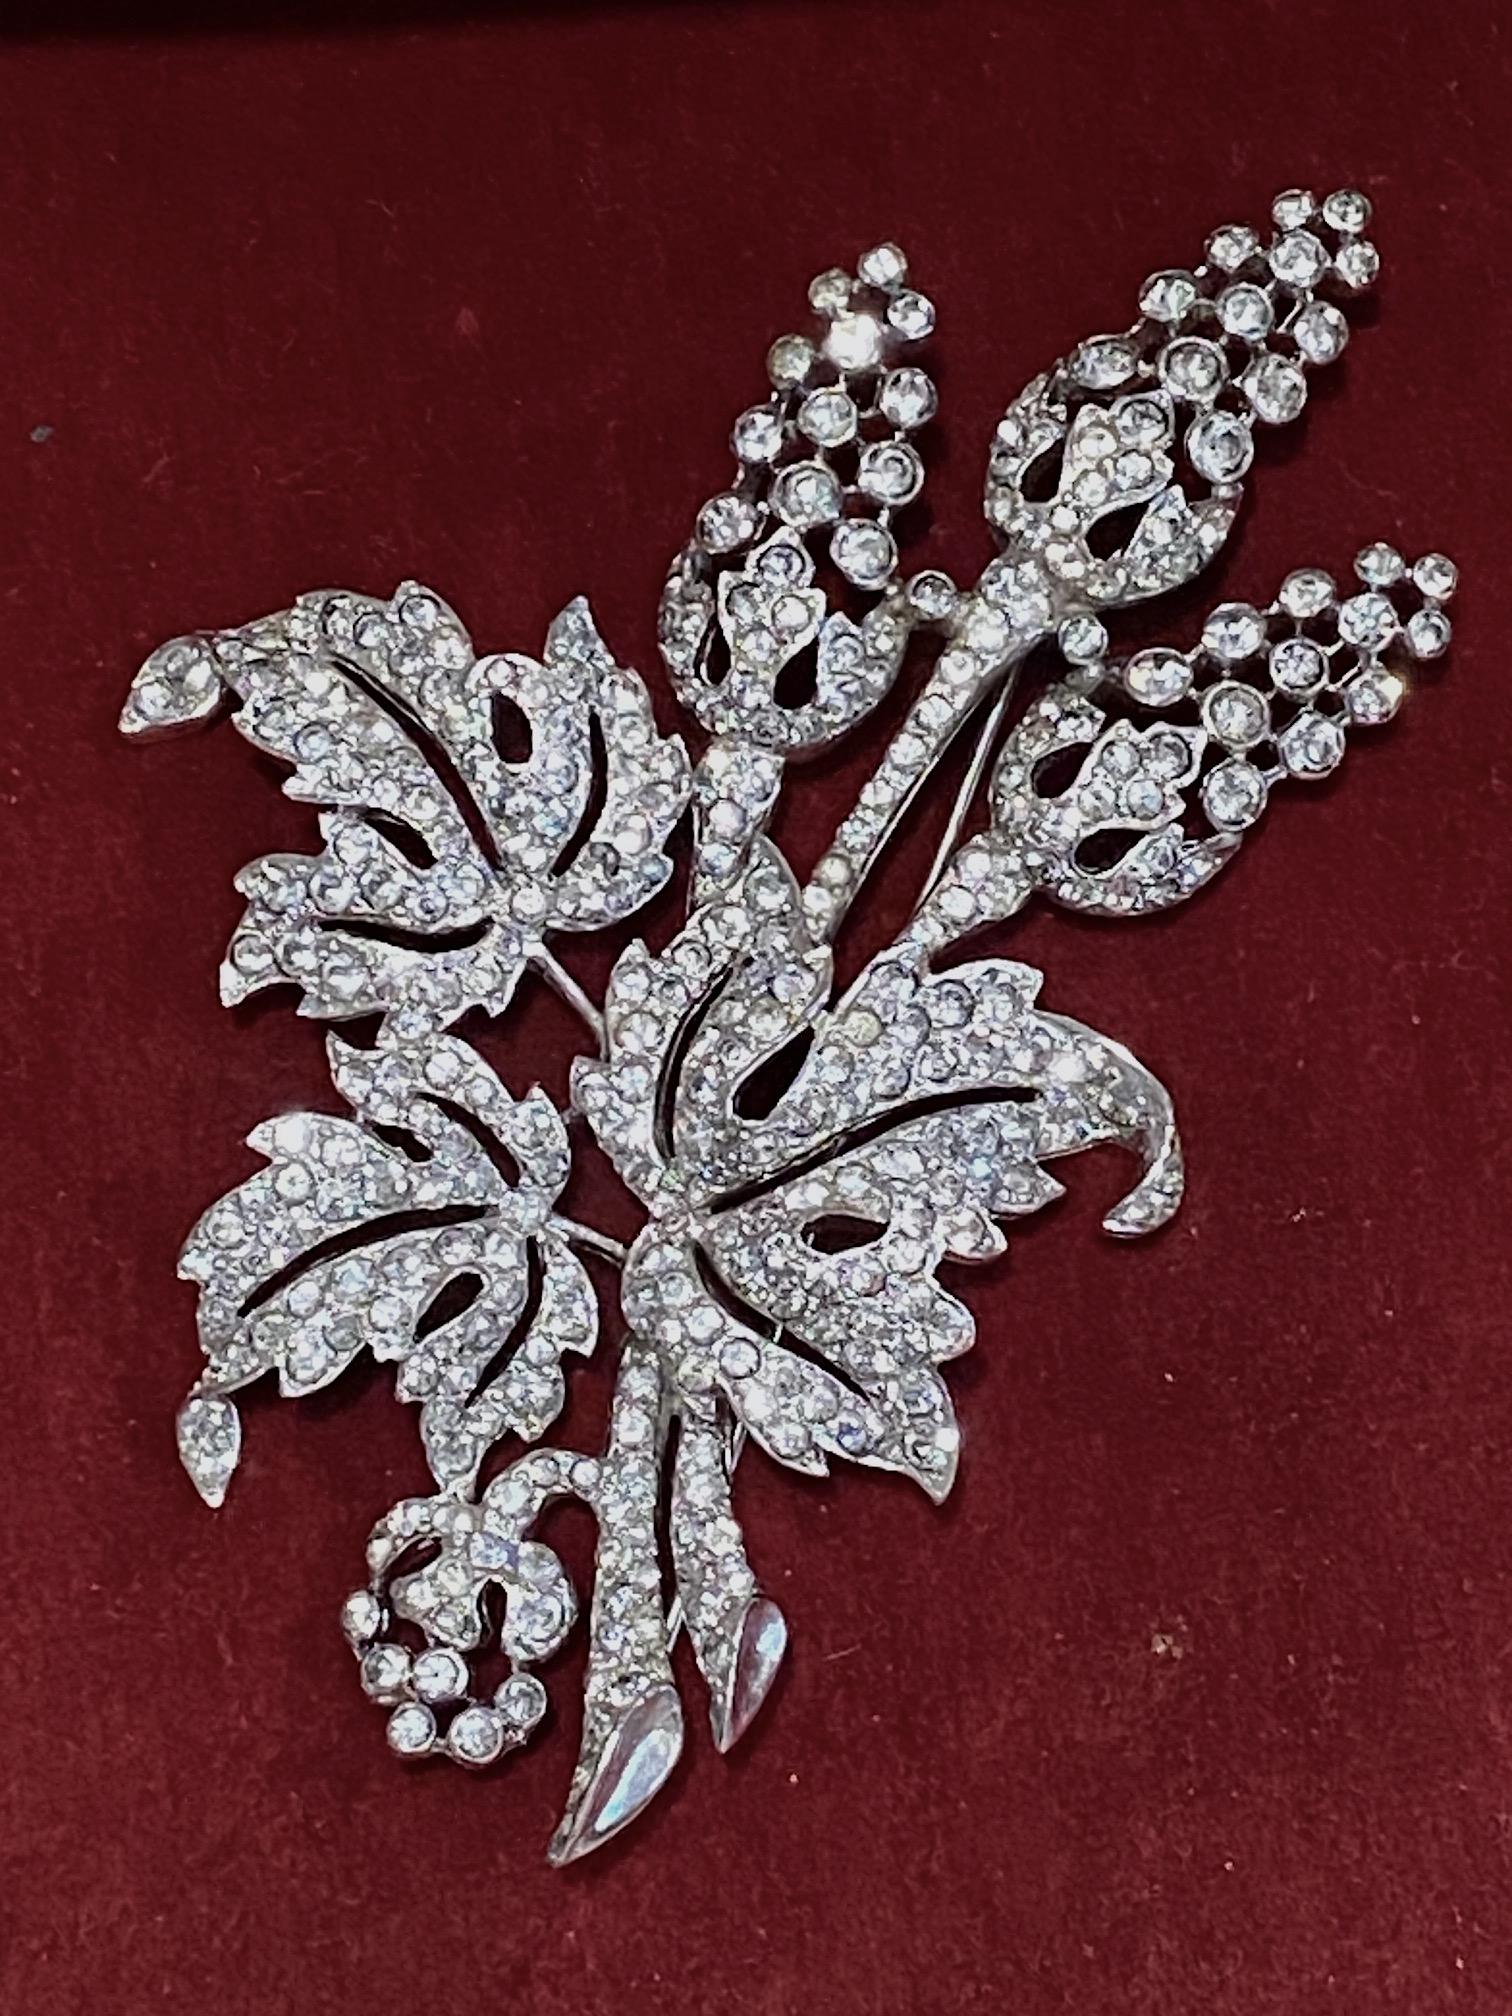 Art Deco Marcel Boucher Rhinestone Floral Brooch from 1941 For Sale